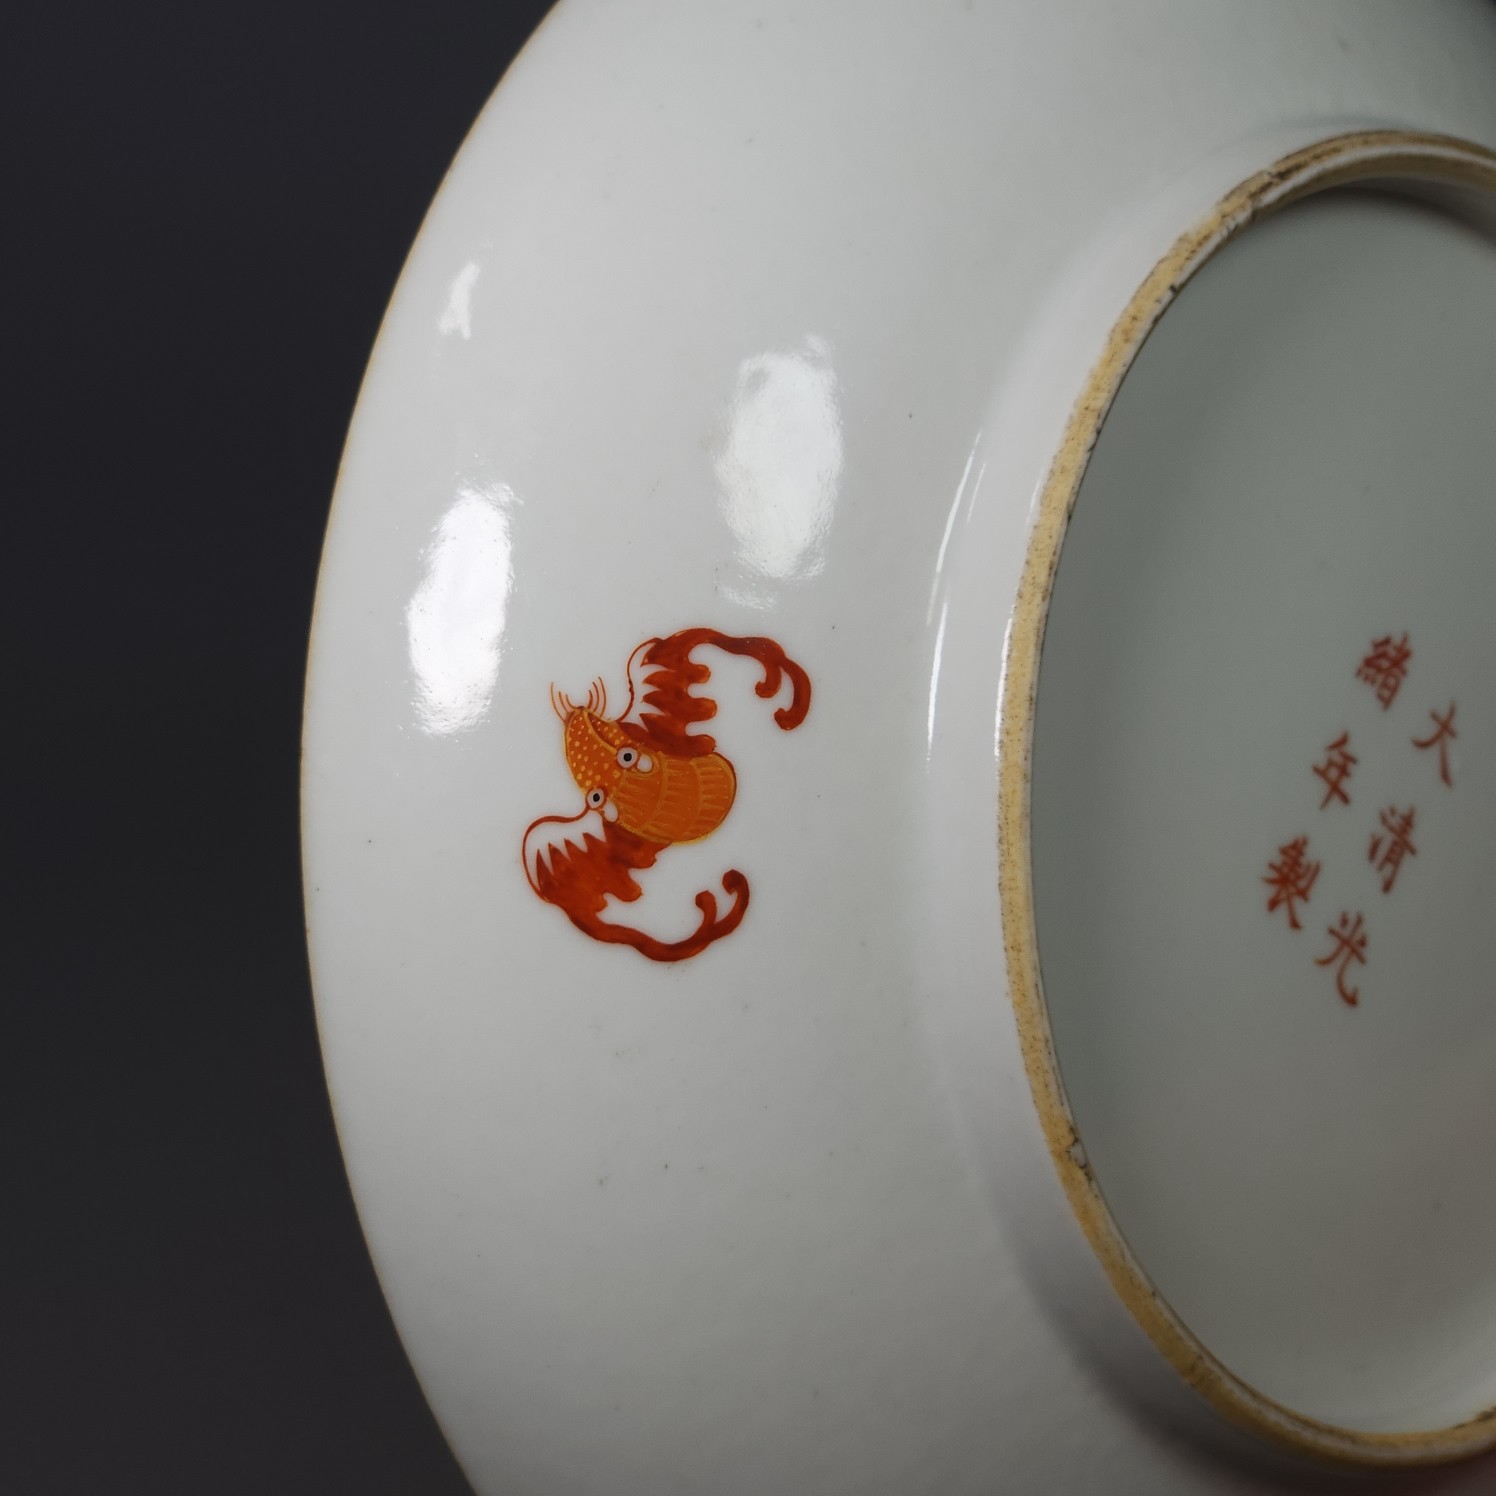 Guangxu Sanskrit red dragon and phoenix plate in the Qing Dynasty - Image 8 of 9